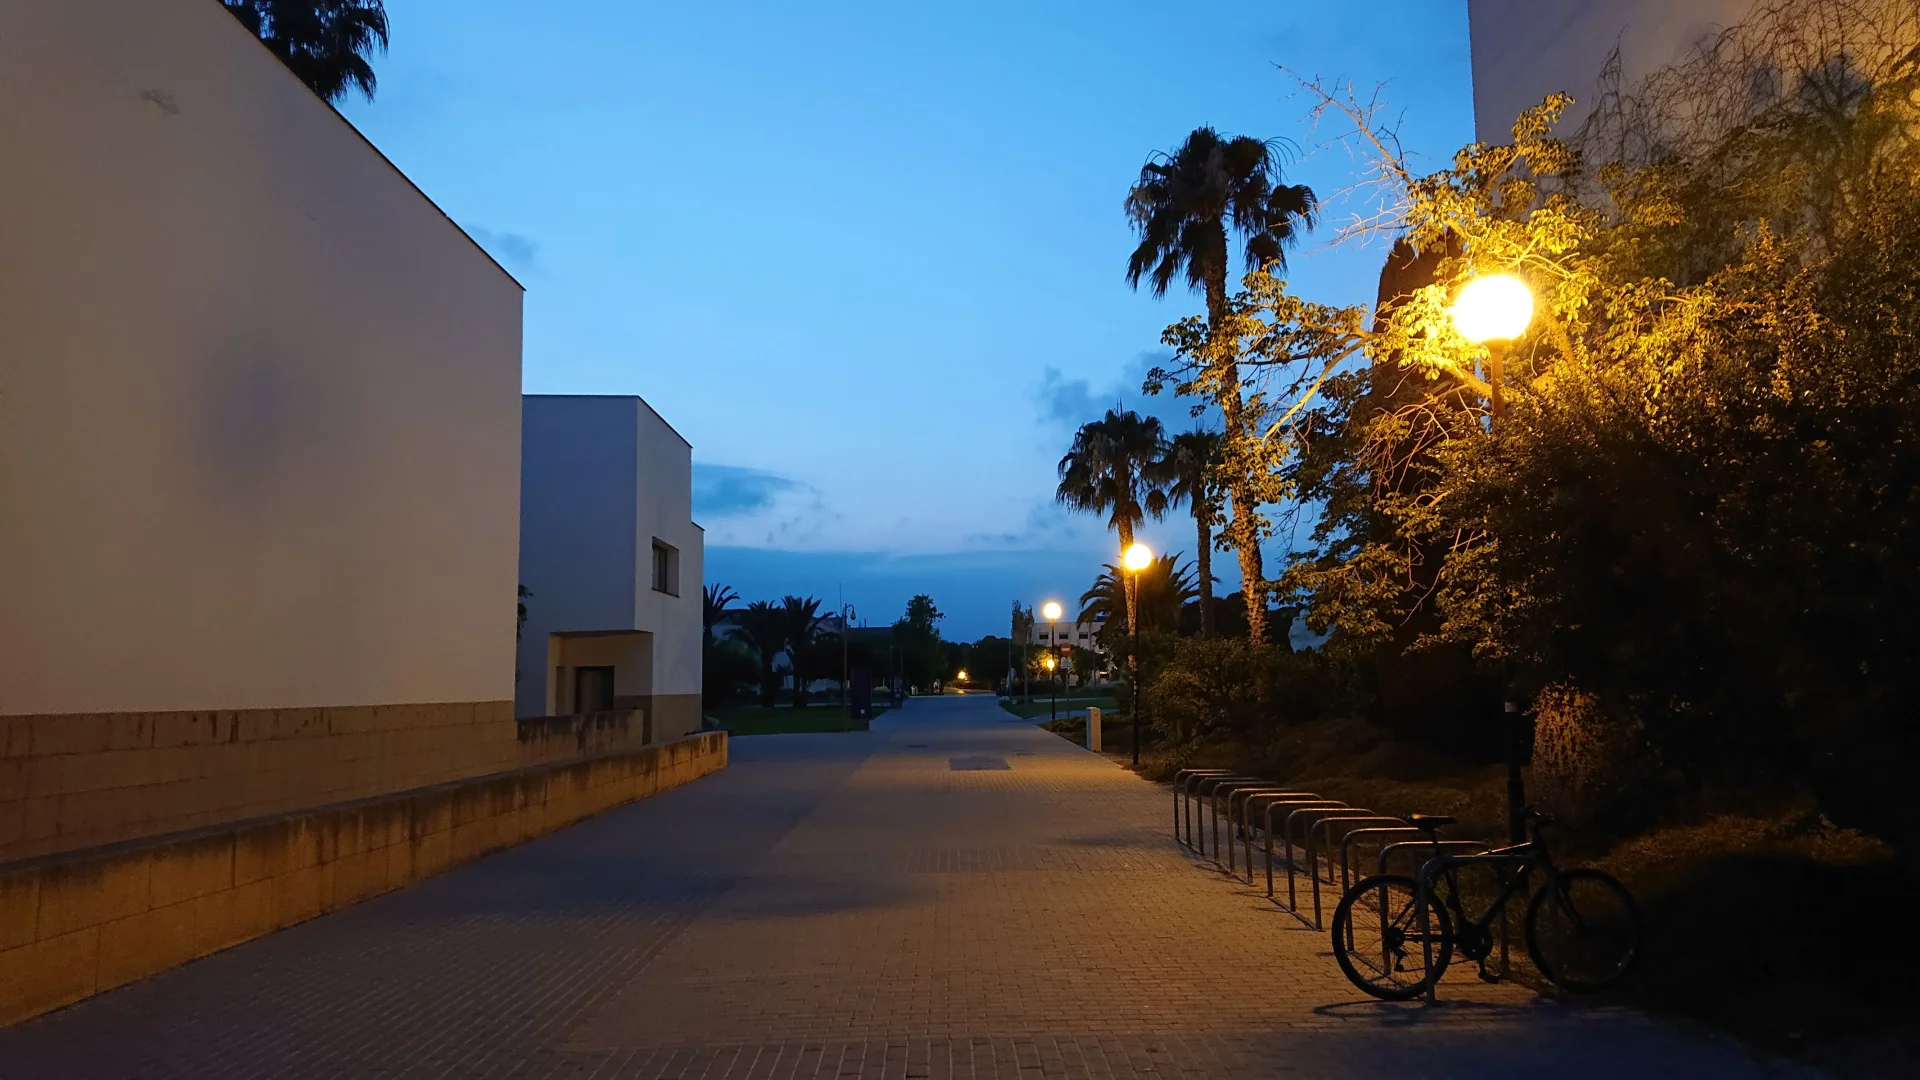 A picture of one of the streets of the Univertsity of Alicante's campus